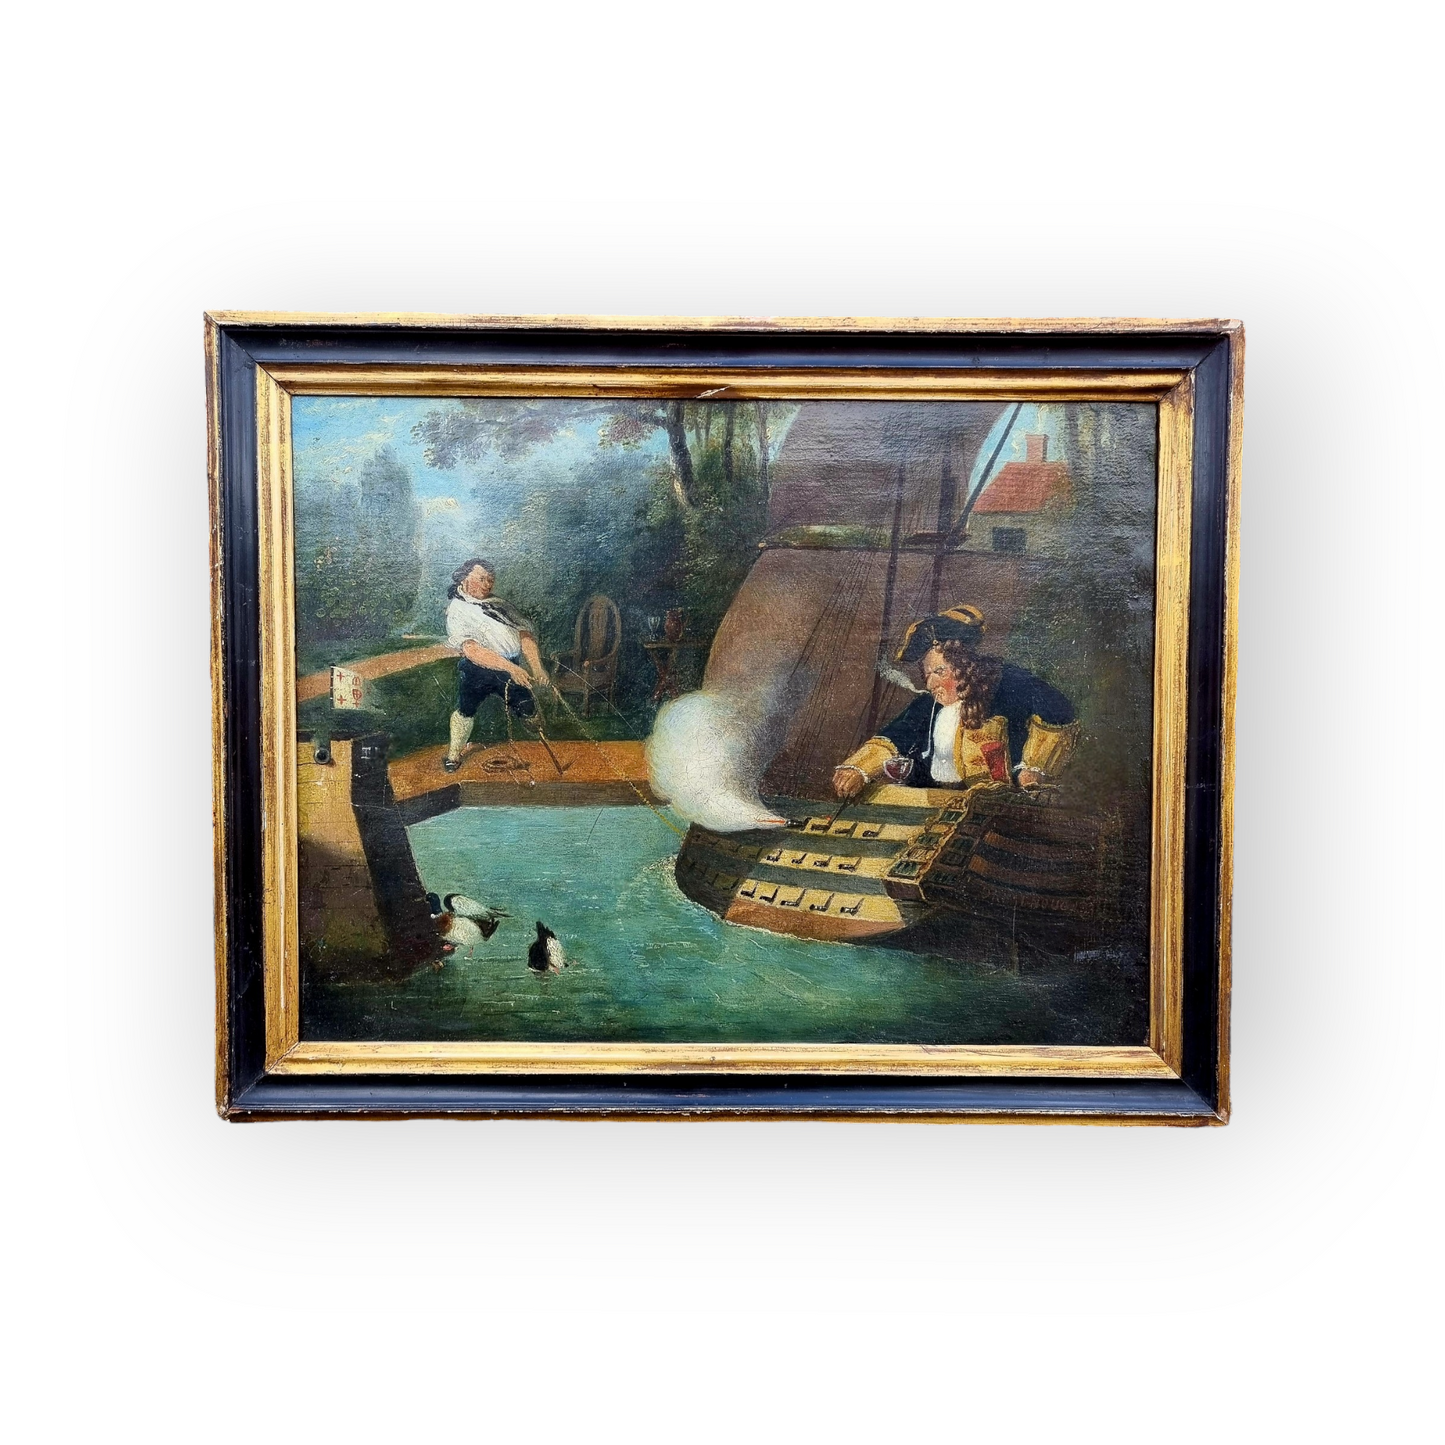 After Robert William Buss (1804-1875) Entitled "The Wooden Walls of Old England" - The Original in the Collection of The Earl of Coventry, An Early 19th Century English Antique Folk Art Oil on Canvas Maritime Painting